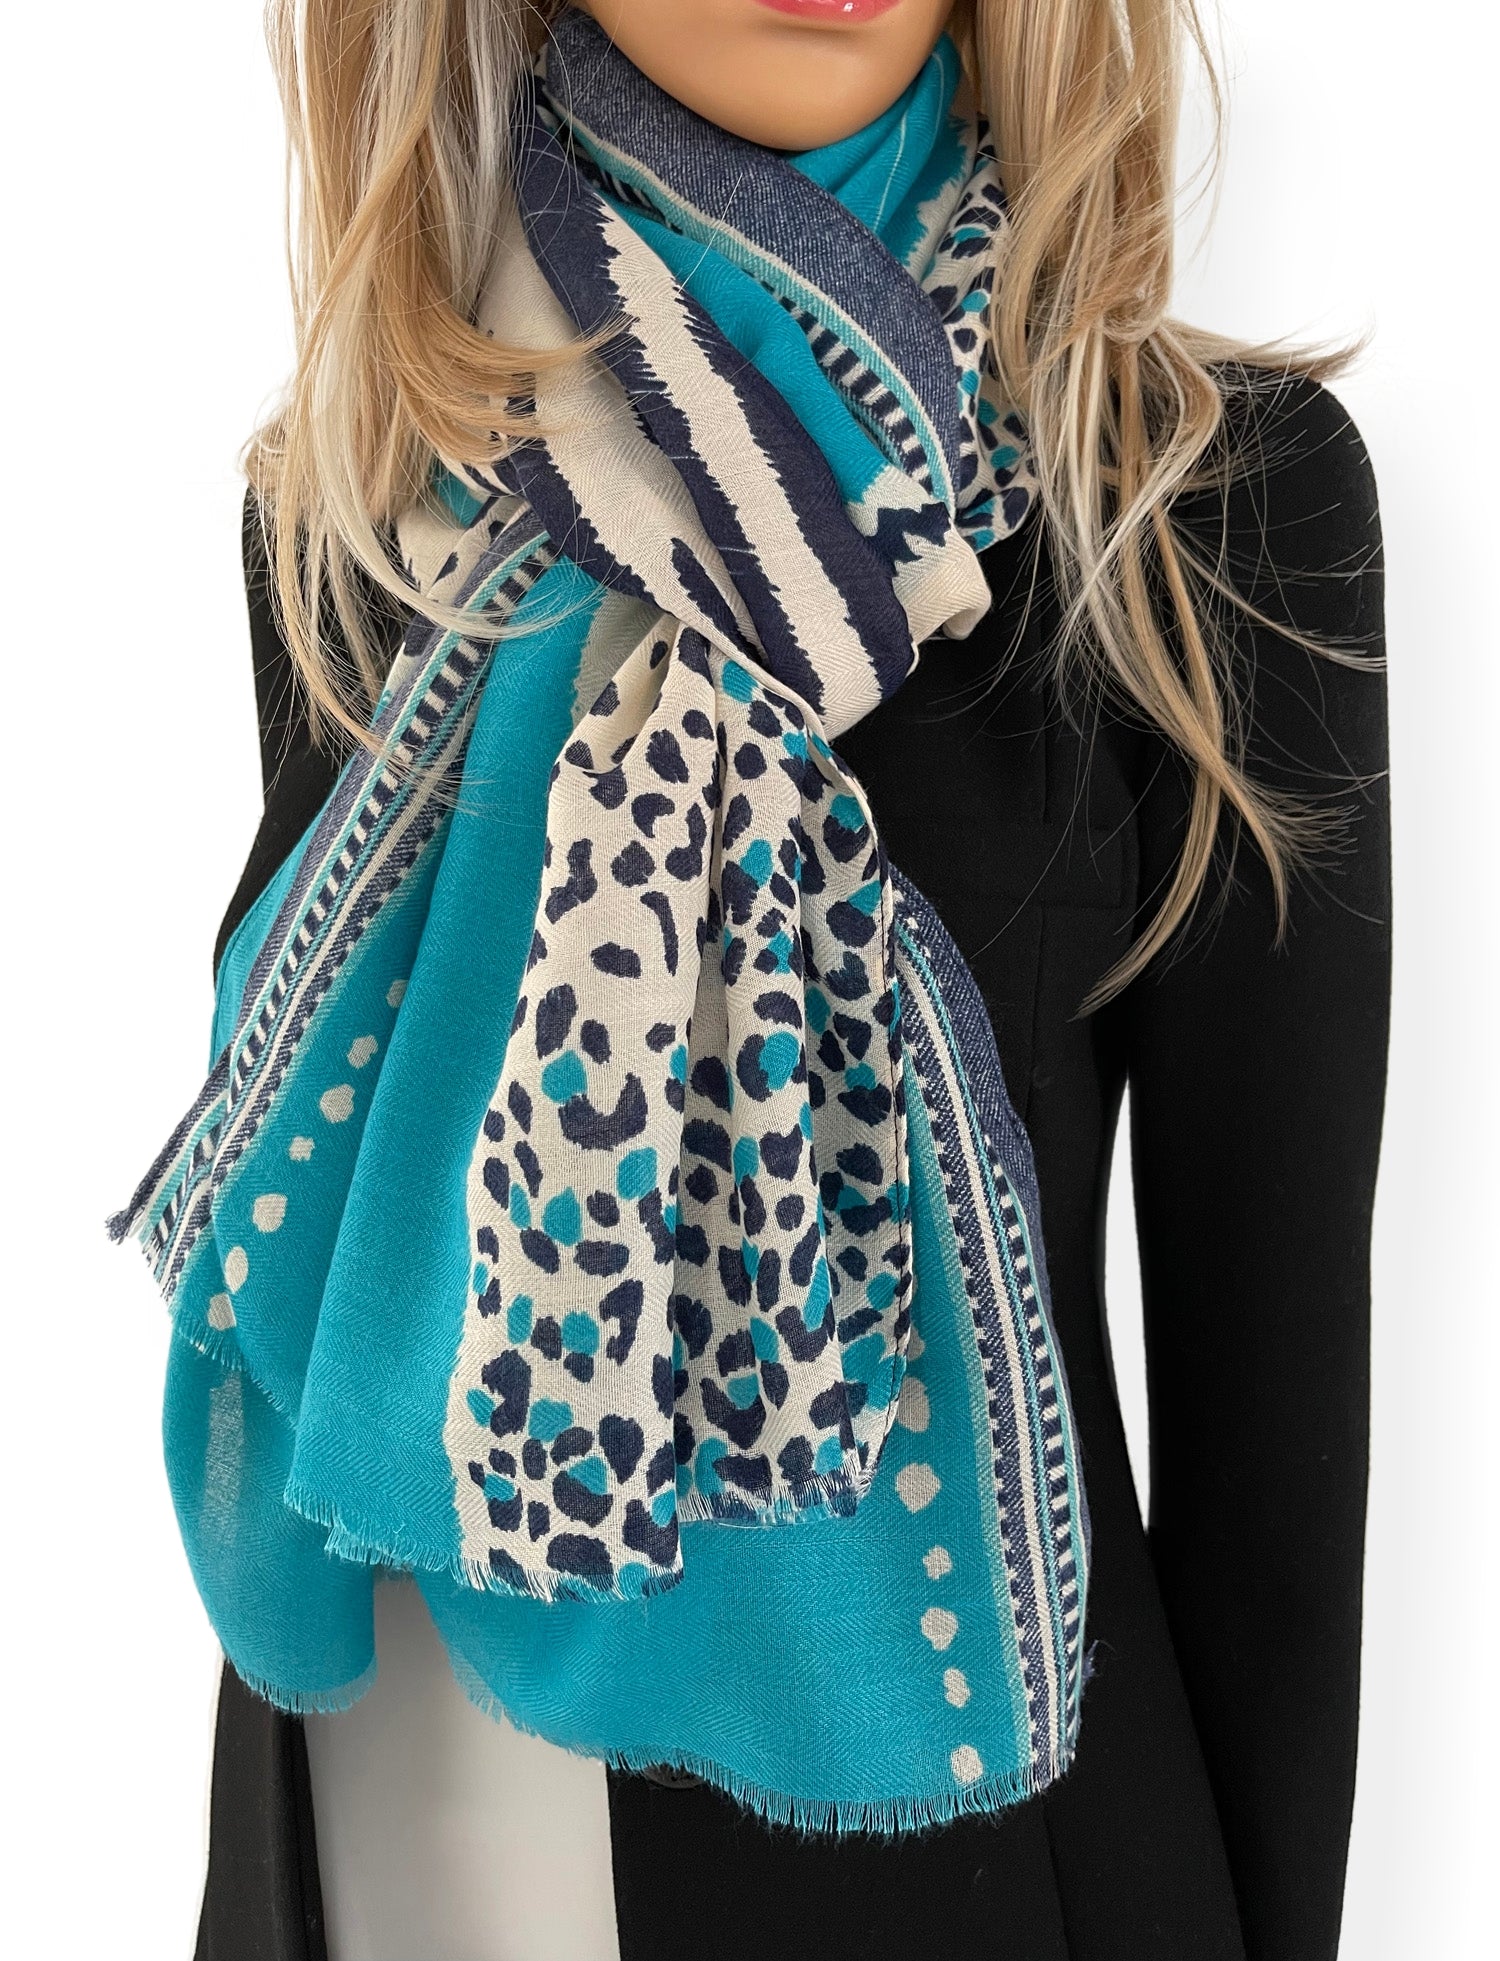 LARGE TURQUOISE BLUE TIGER AND LEOPARD PRINT SHAWL SCARF